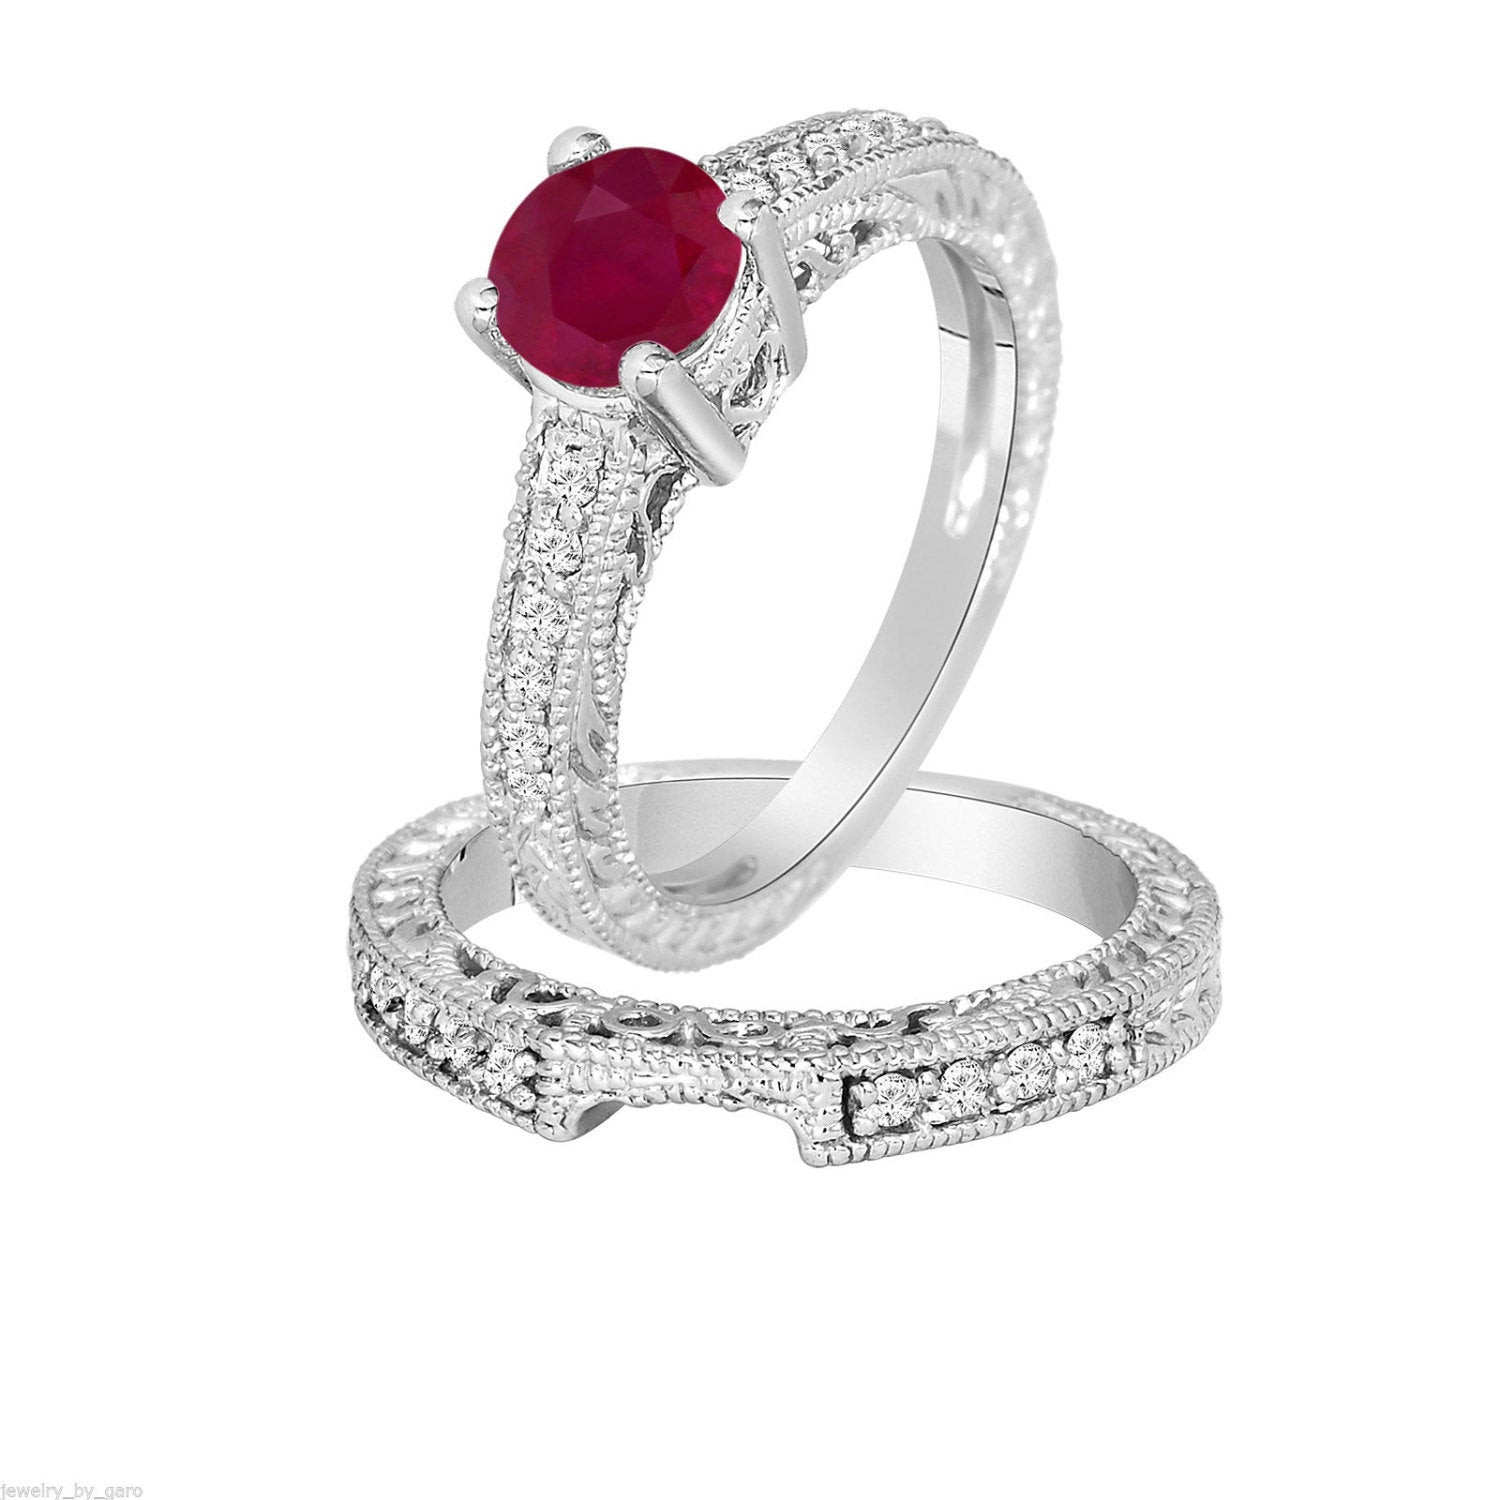 Diamond And Ruby Engagement Rings
 0 87 Carat Ruby & Diamond Engagement Ring Wedding by